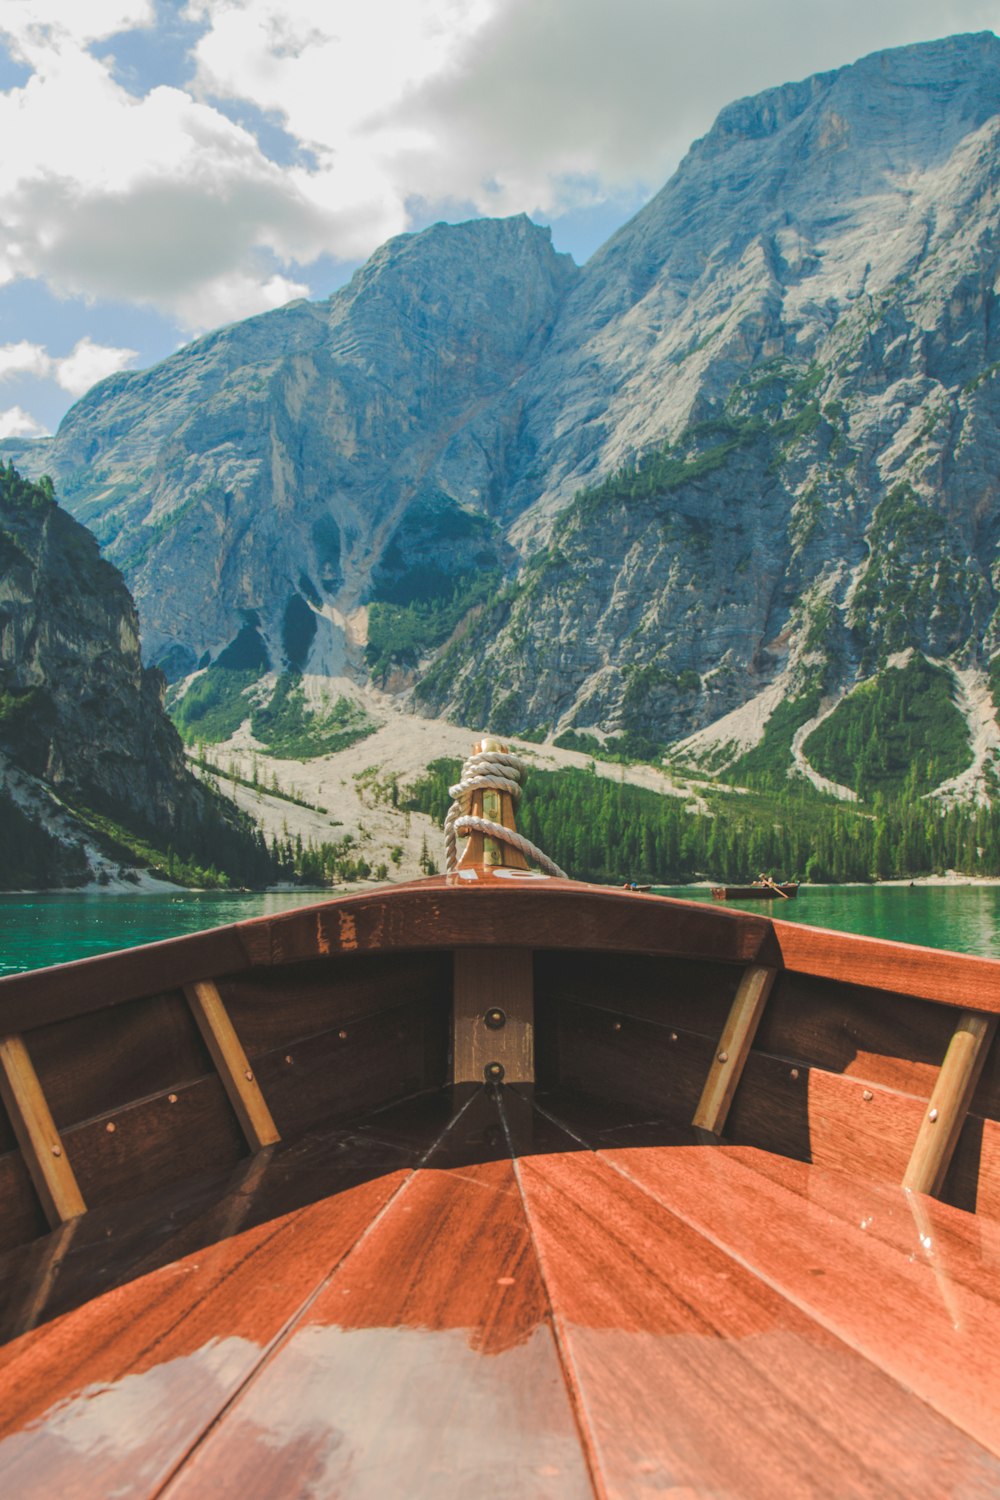 a view of a mountain lake from a boat